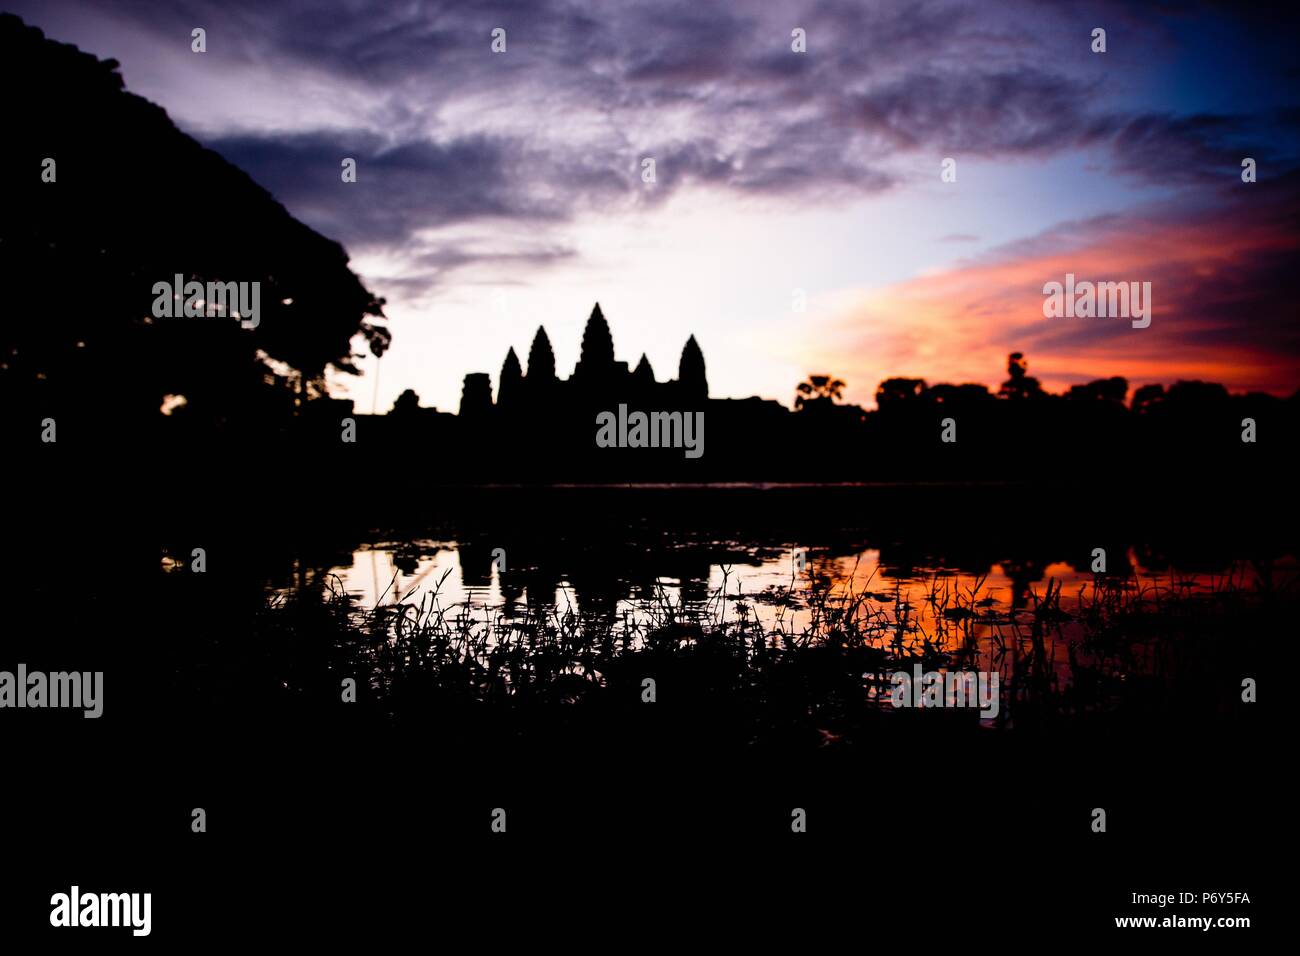 Religious temples in Cambodia of Angkor Wat Stock Photo